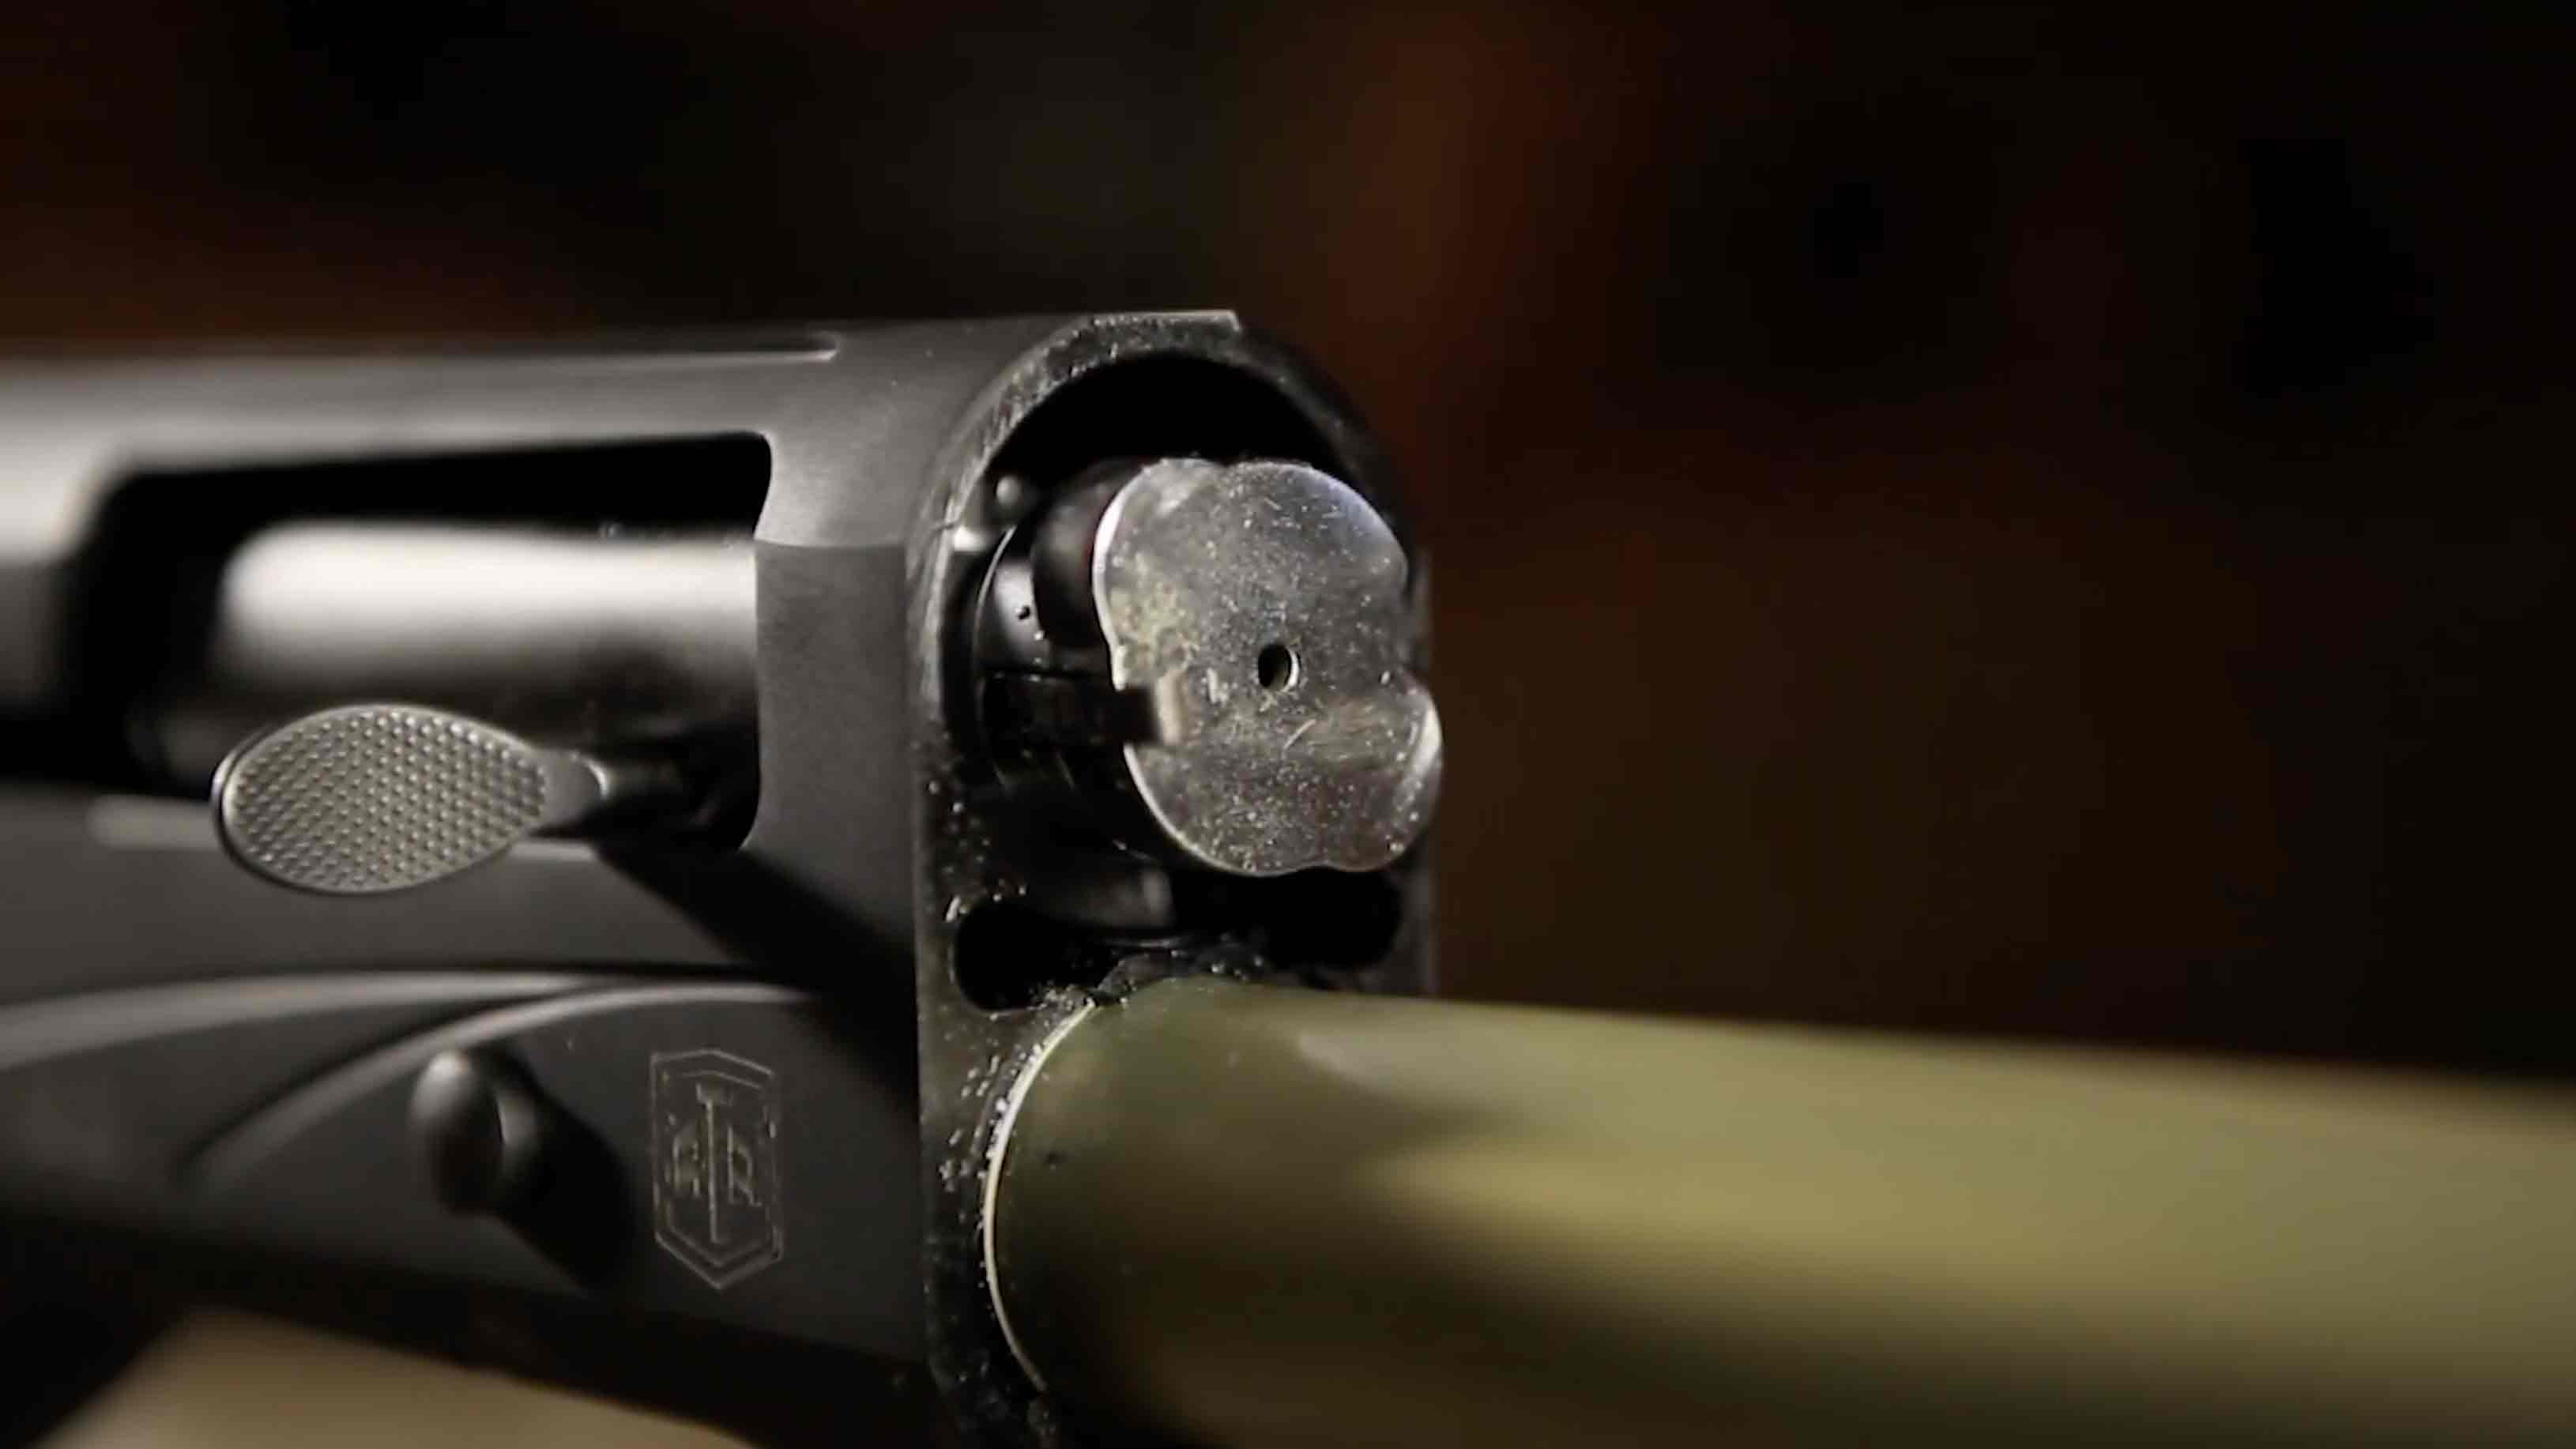 A look at the dual locking-lug bolt on the ATA Arms NEO.